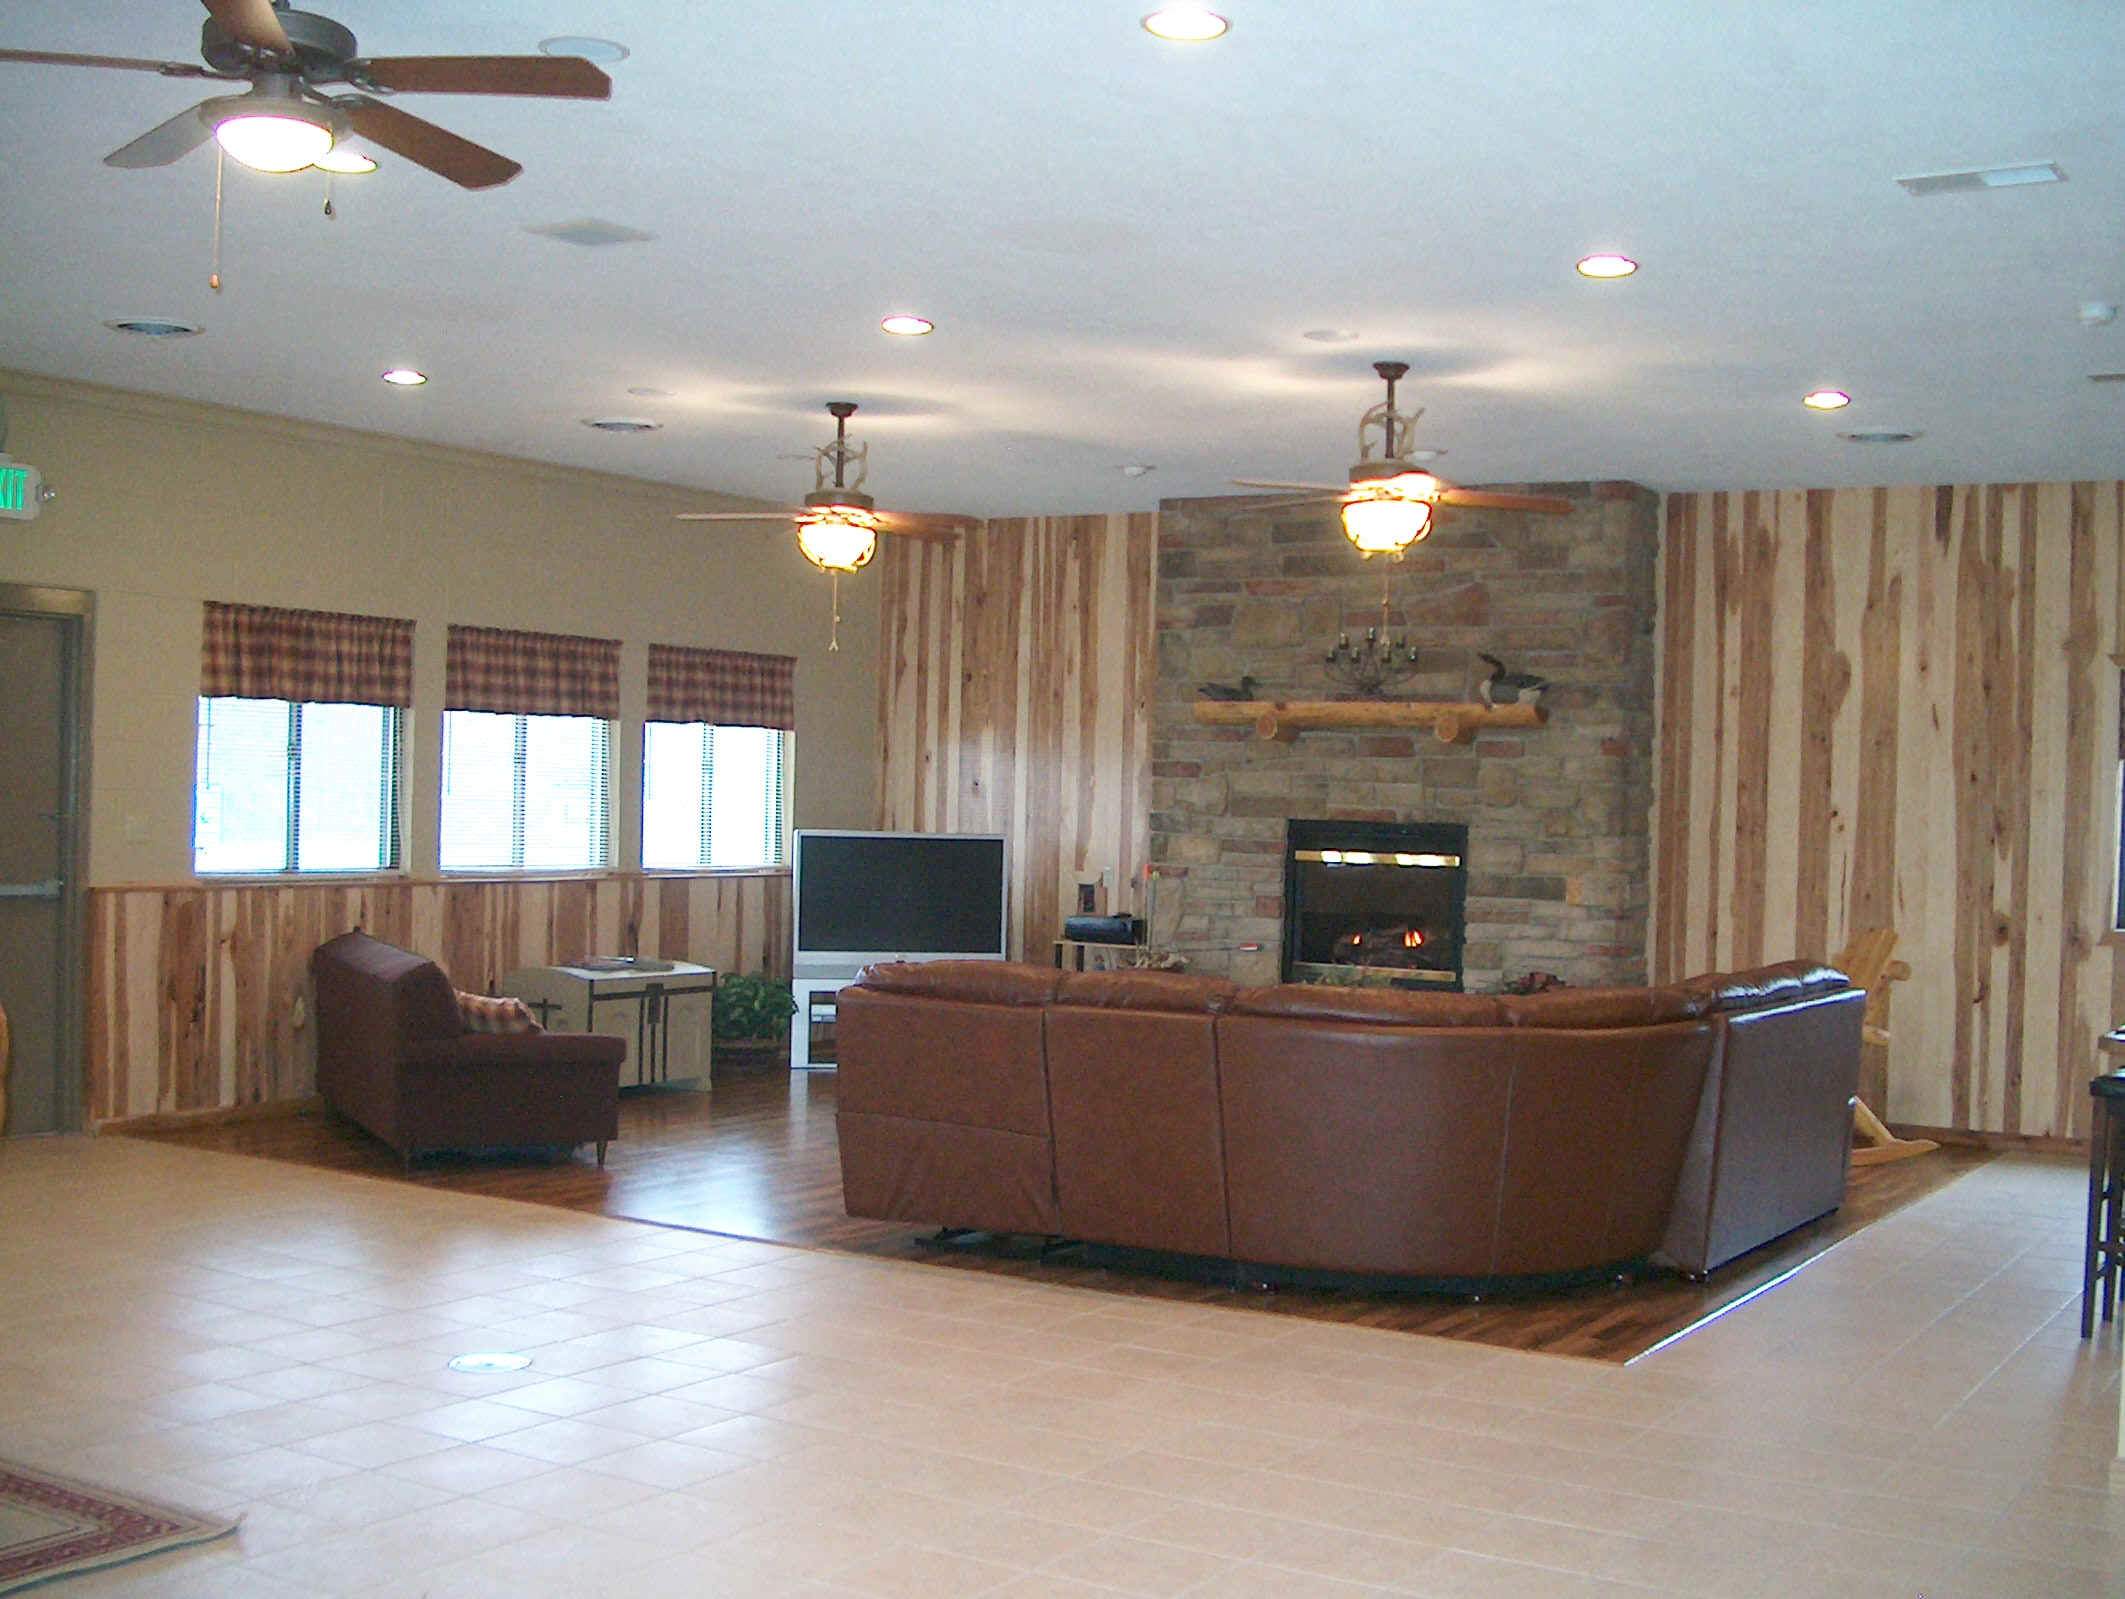 Lounge area with fireplace and widescreen TV -  Langham Outdoors Lodge building